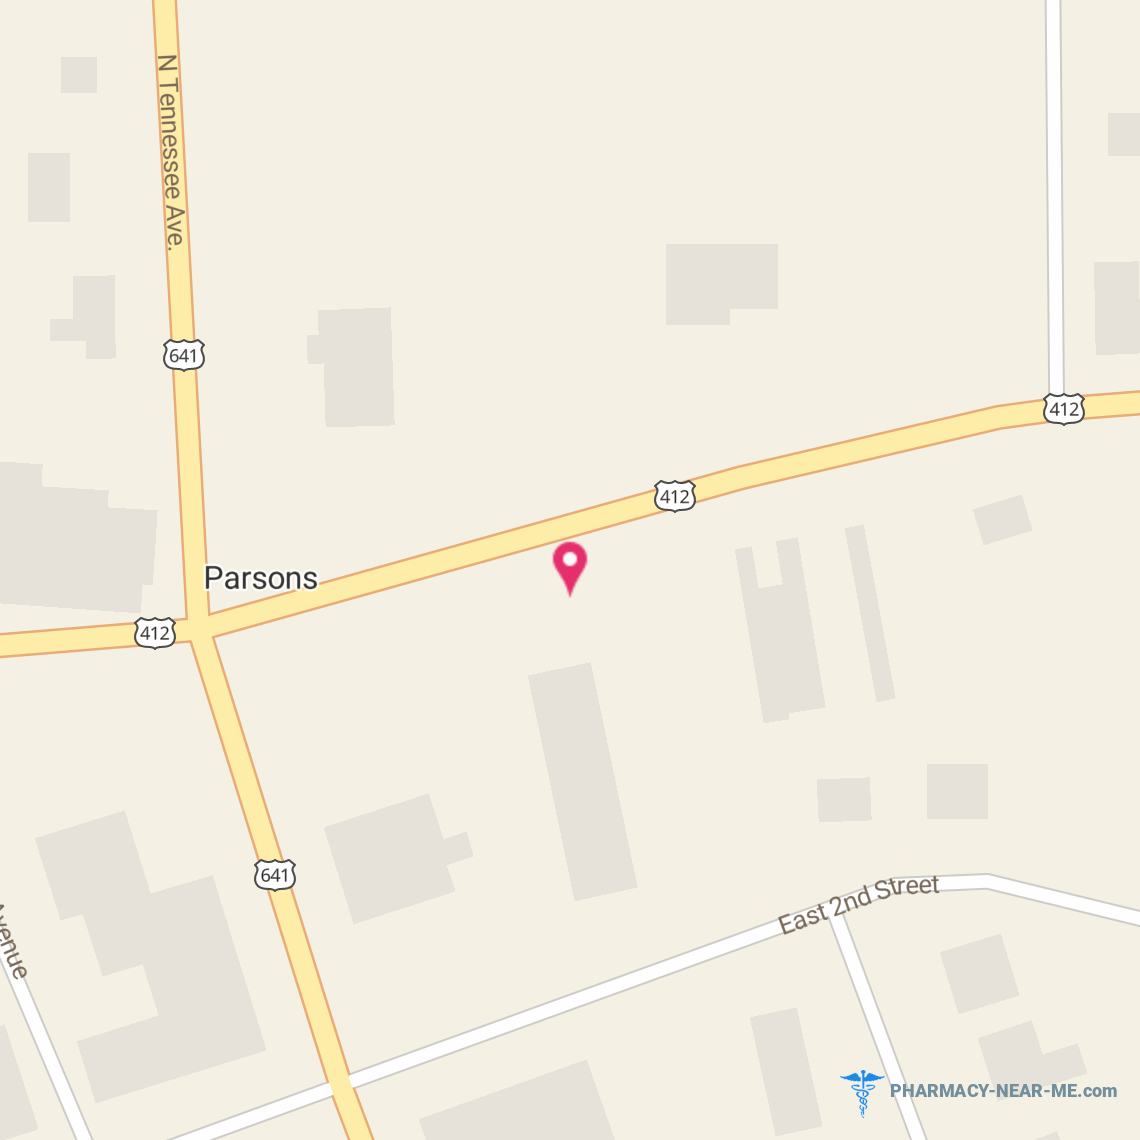 CITY DRUGS - Pharmacy Hours, Phone, Reviews & Information: 18 West Main Street, Parsons, Tennessee 38363, United States